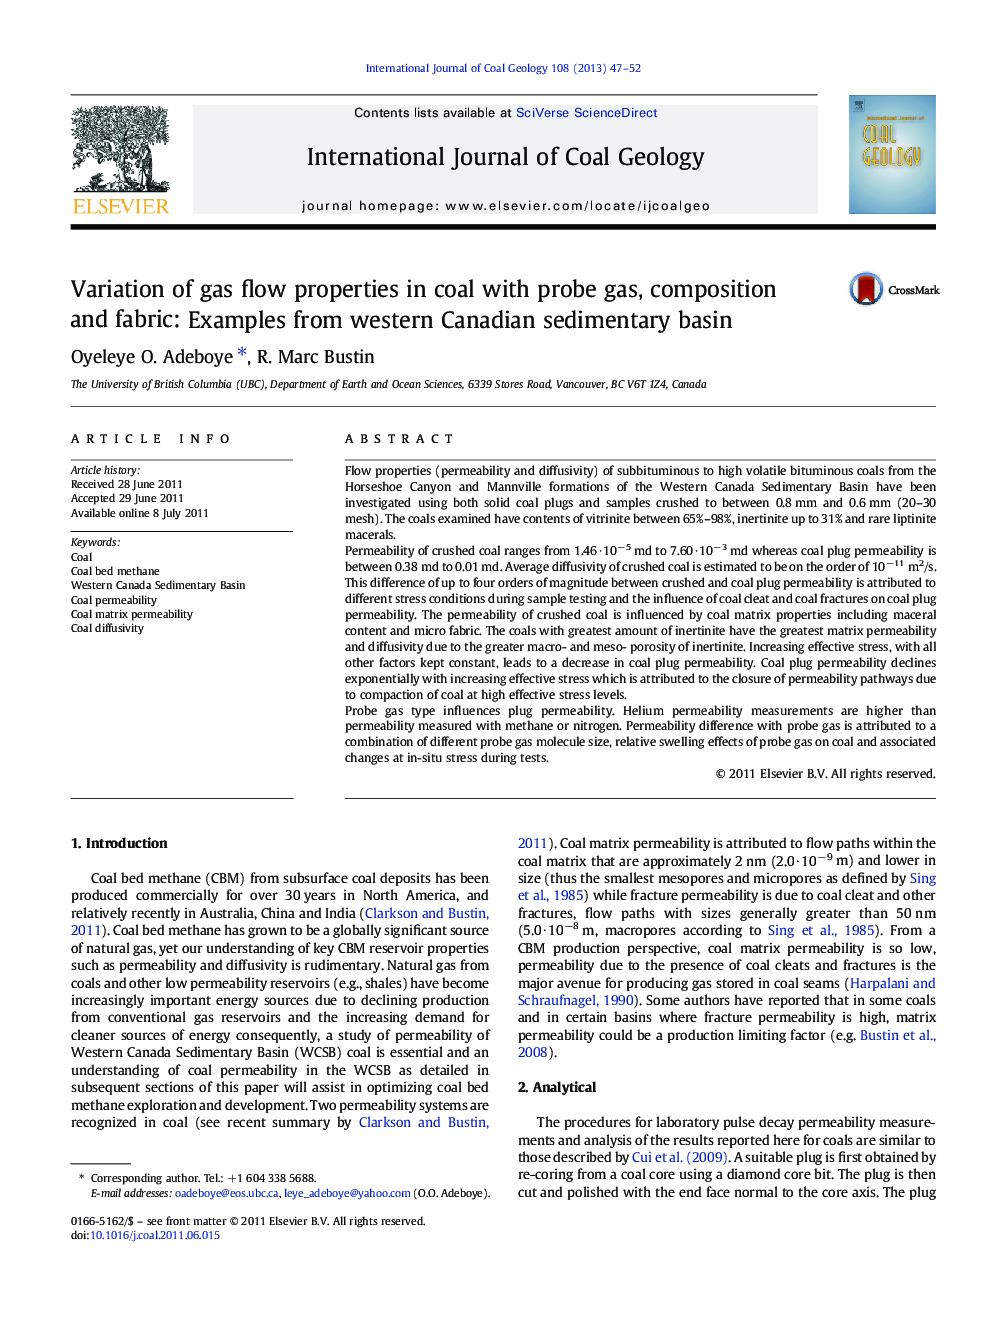 Variation of gas flow properties in coal with probe gas, composition and fabric: Examples from western Canadian sedimentary basin